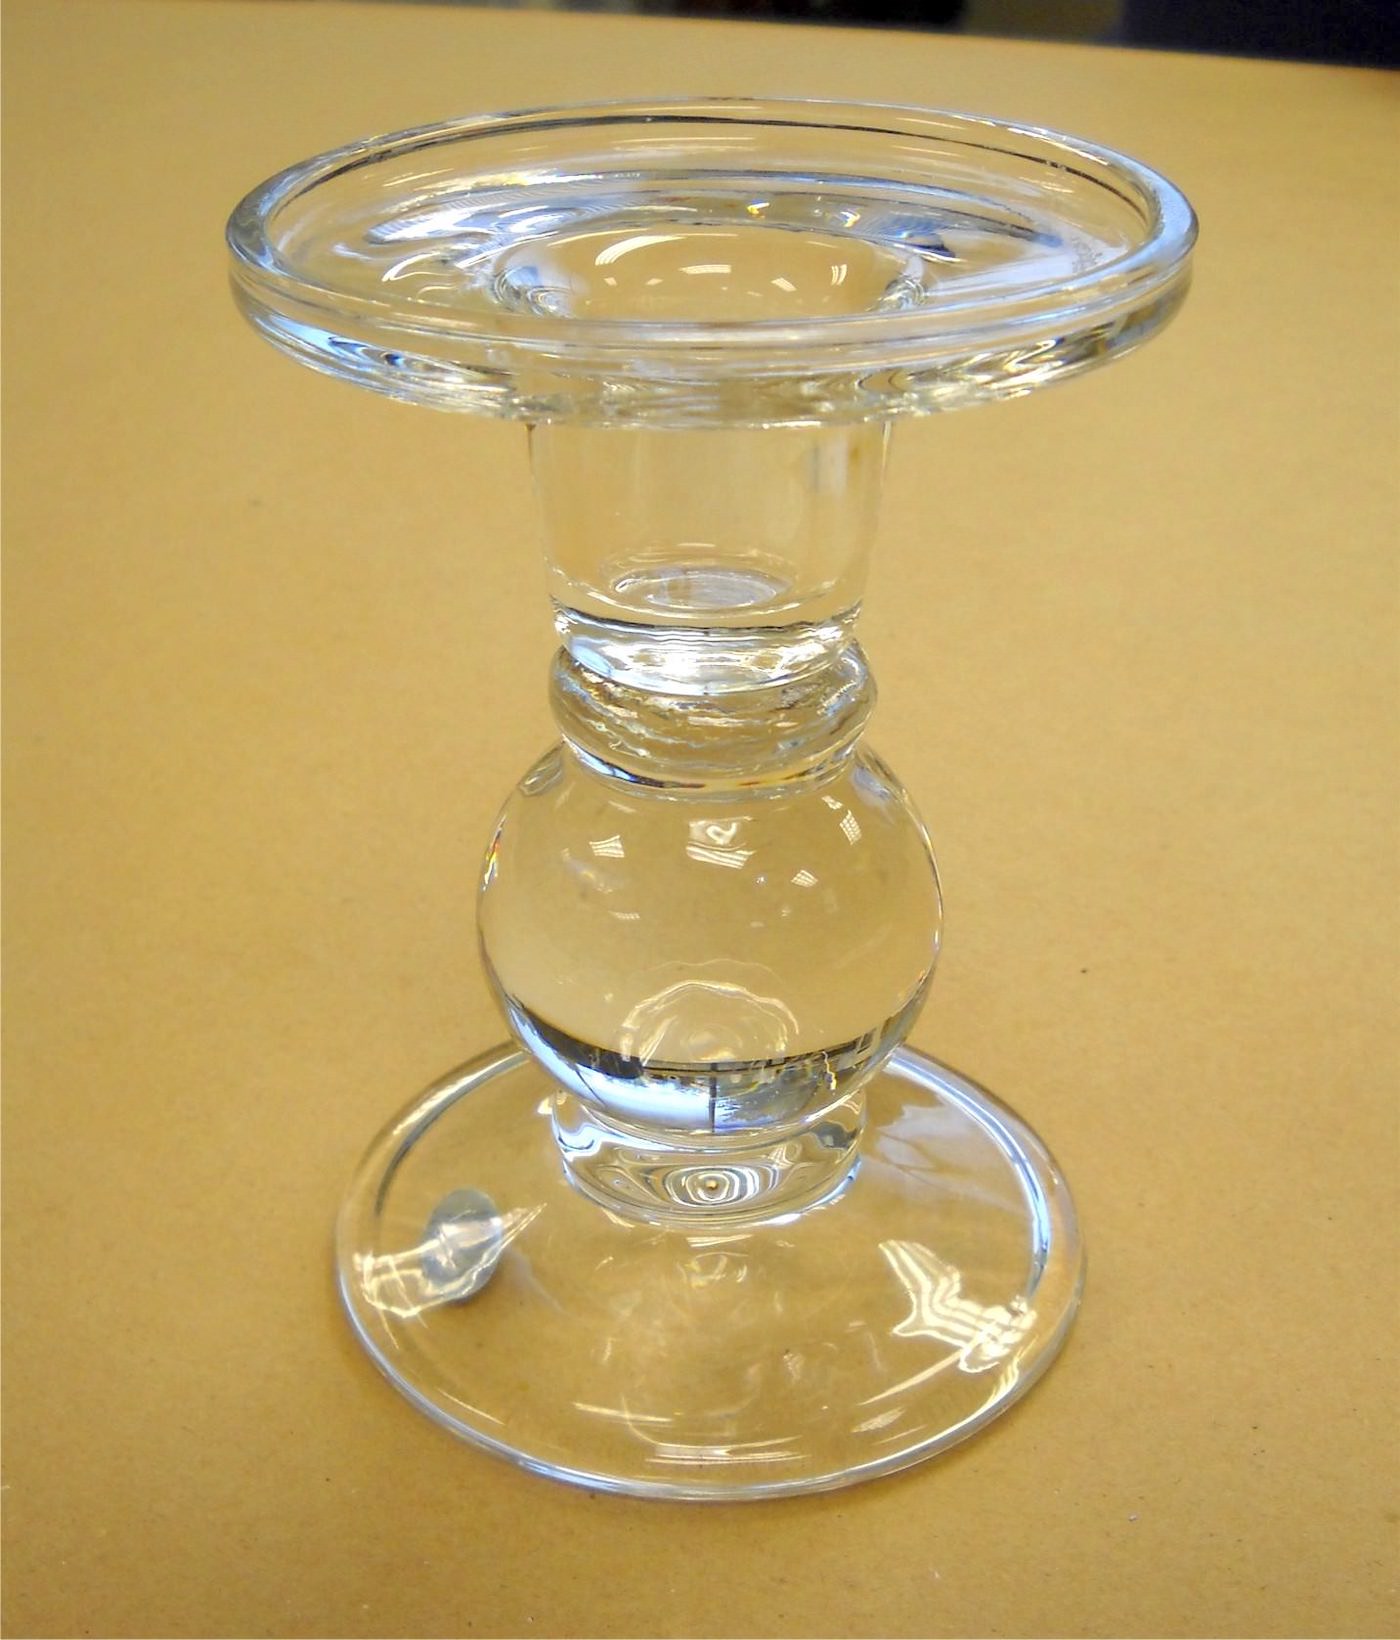 Clean glass candlestick sitting on a work surface